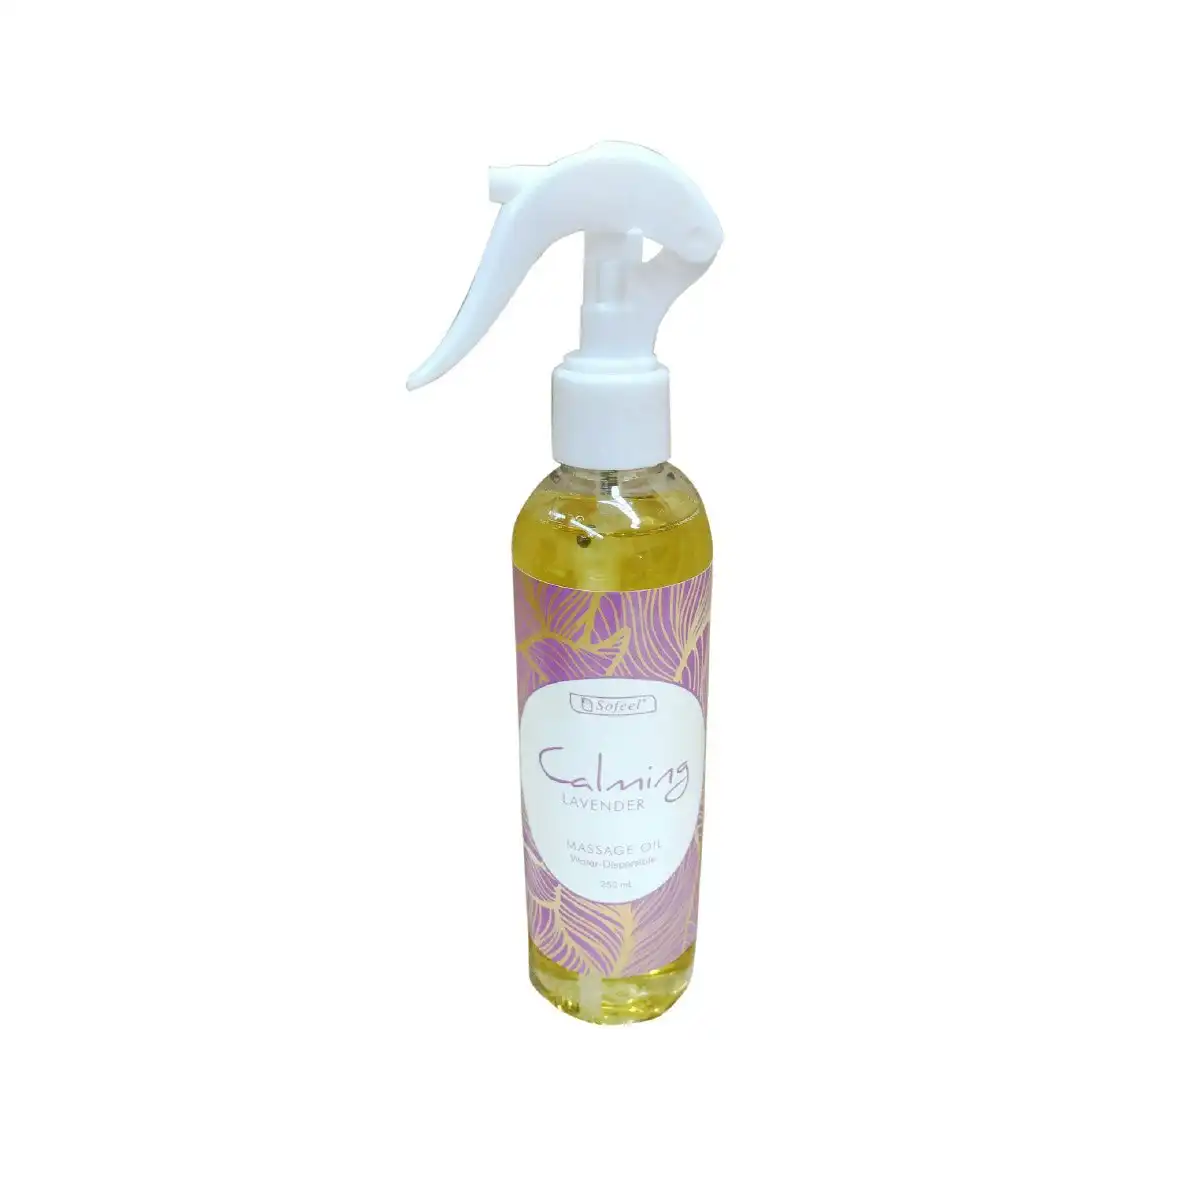 Sofeel Water Dispersible Massage Oils 250ml with Trigger Sprayer Calming Lavender Scent